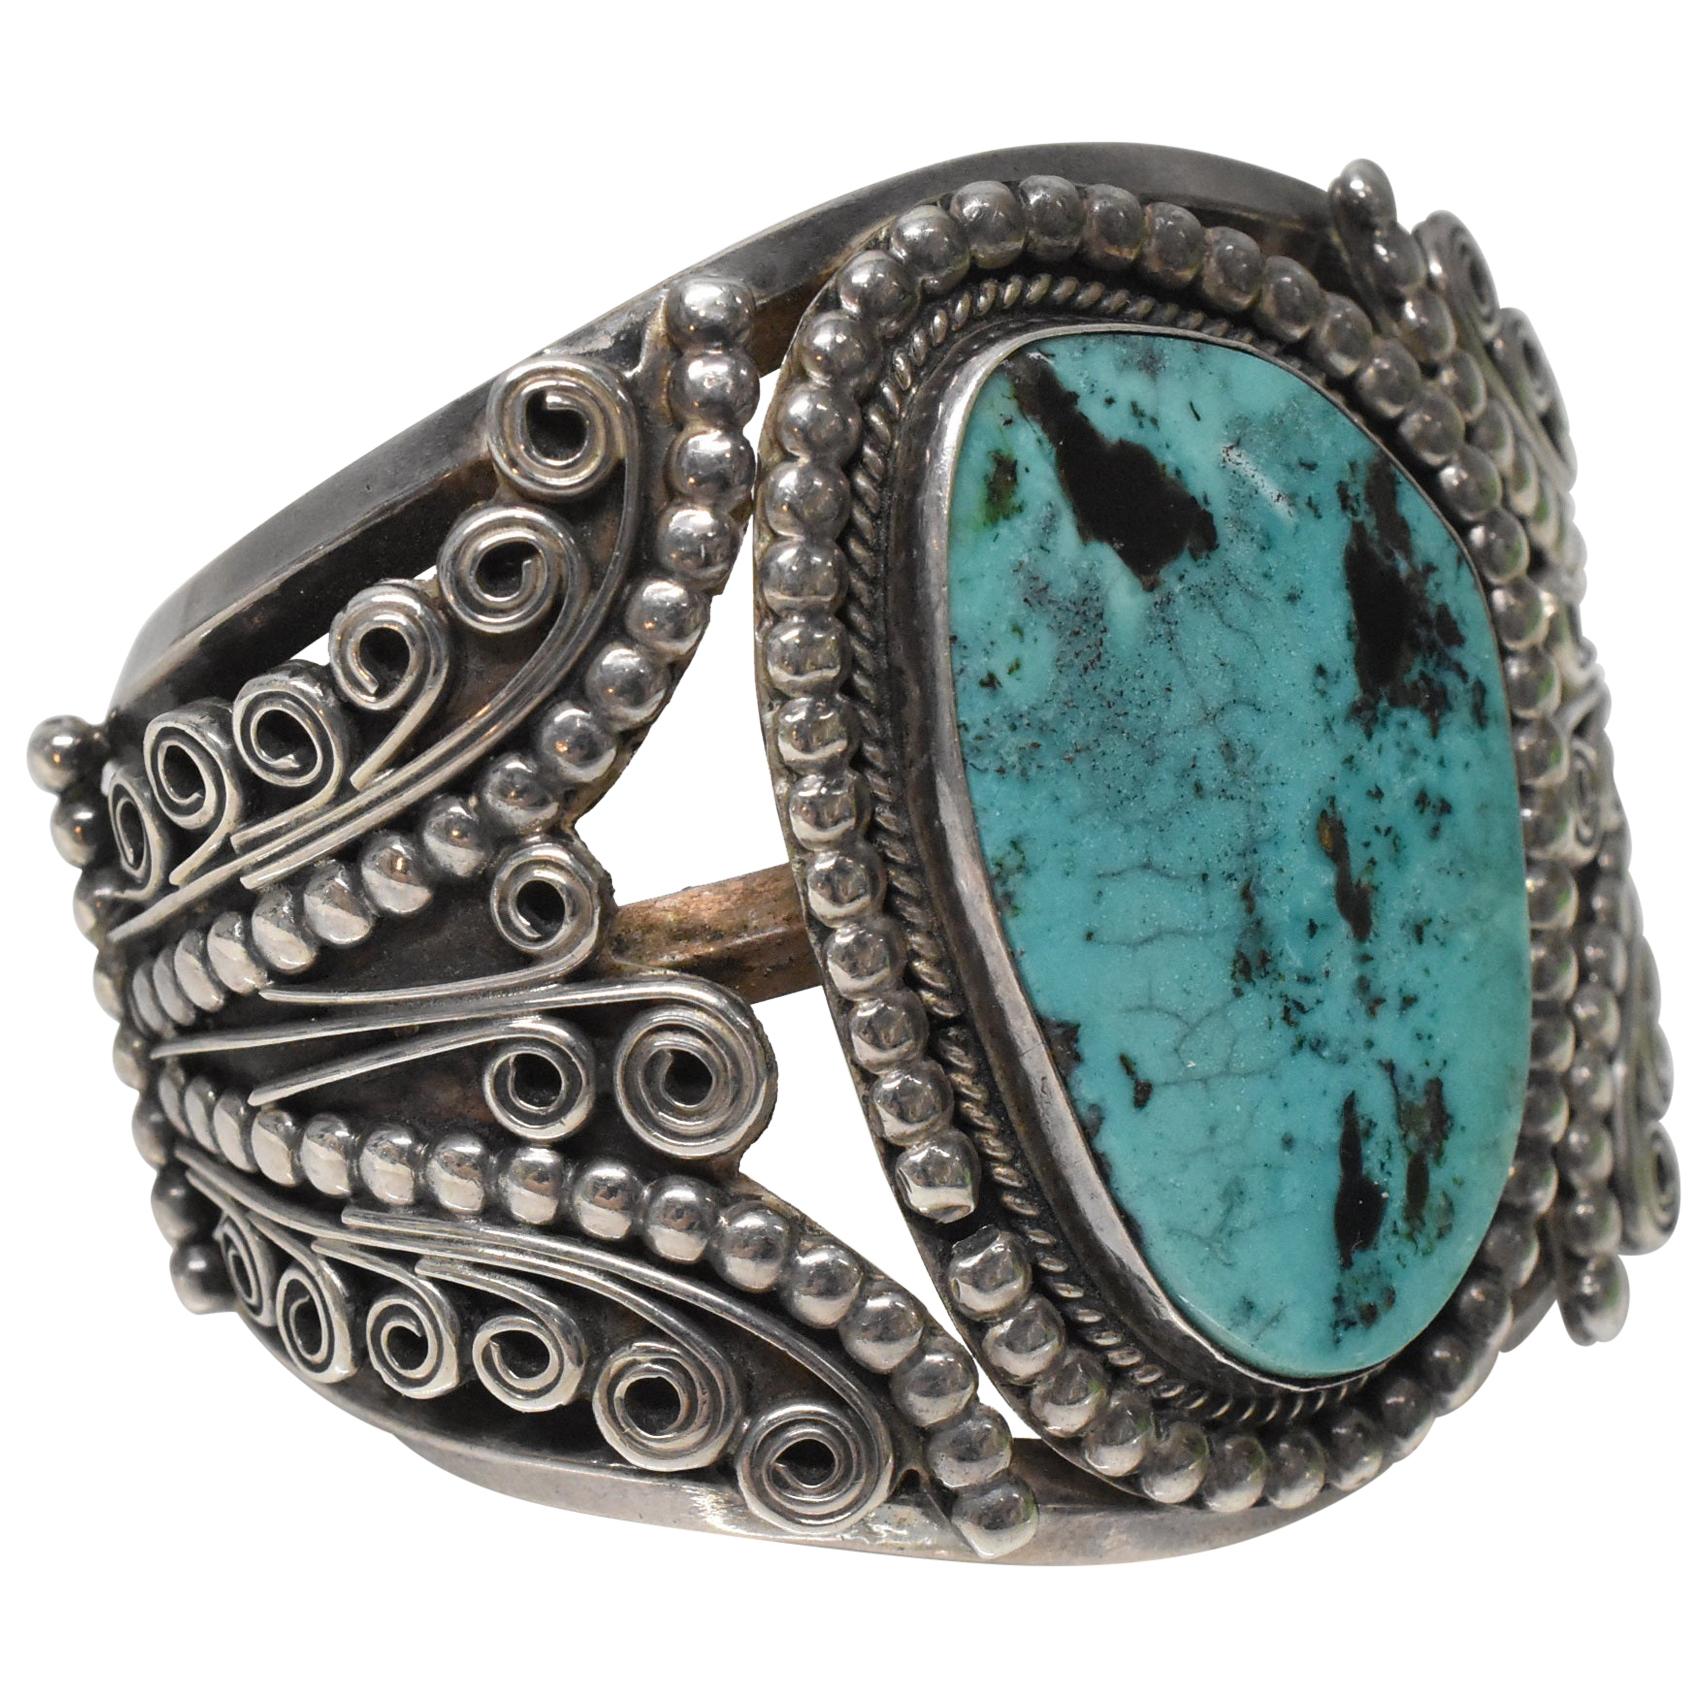 Vintage Sterling Silver and Turquoise Cuff Bracelet